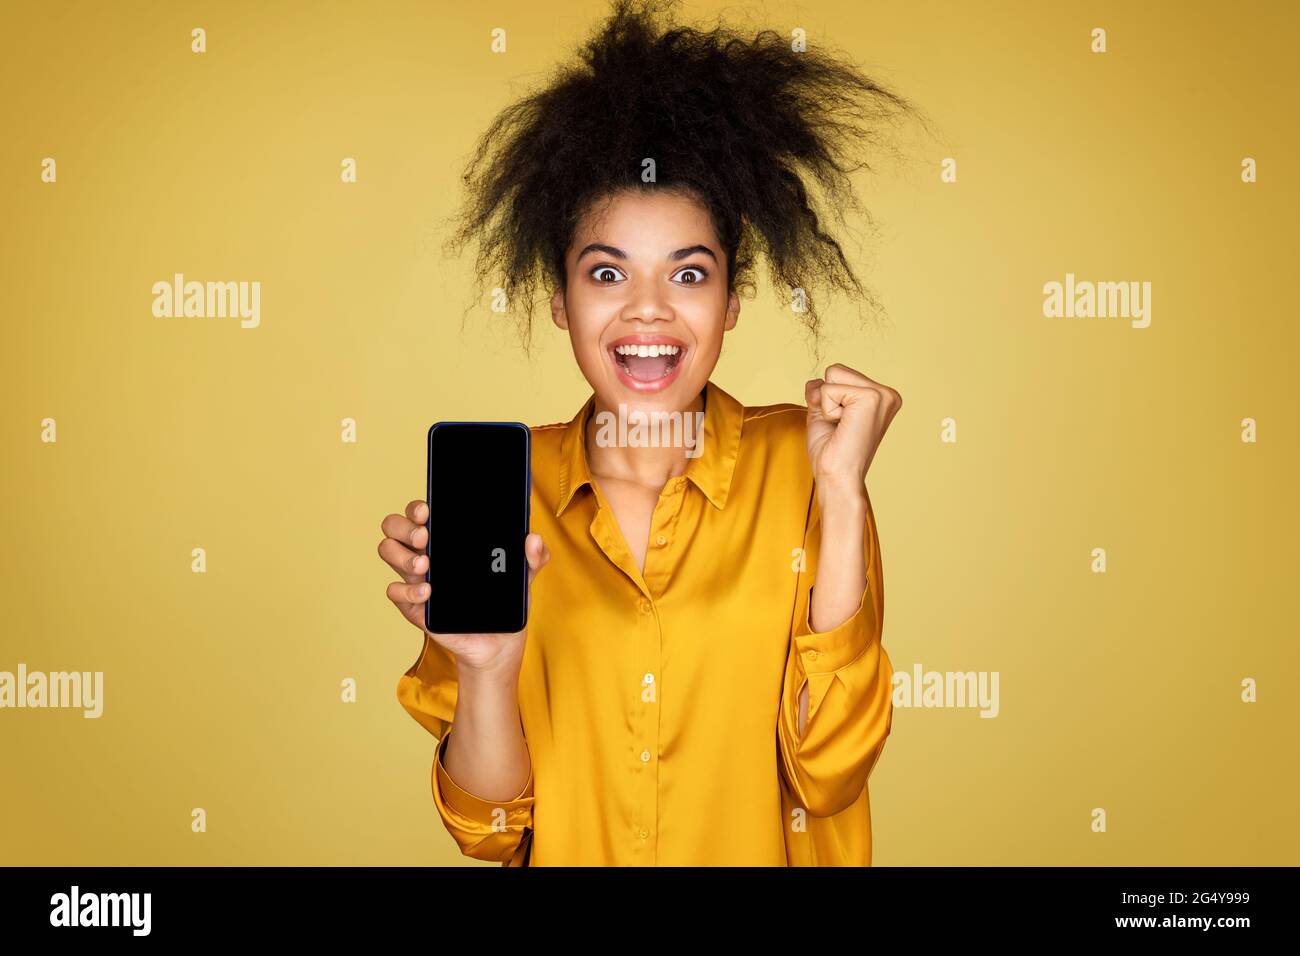 Excited girl shows smartphone and clenches fist, feels overjoyed after winning or good news. Photo of african american girl on yellow background Stock Photo